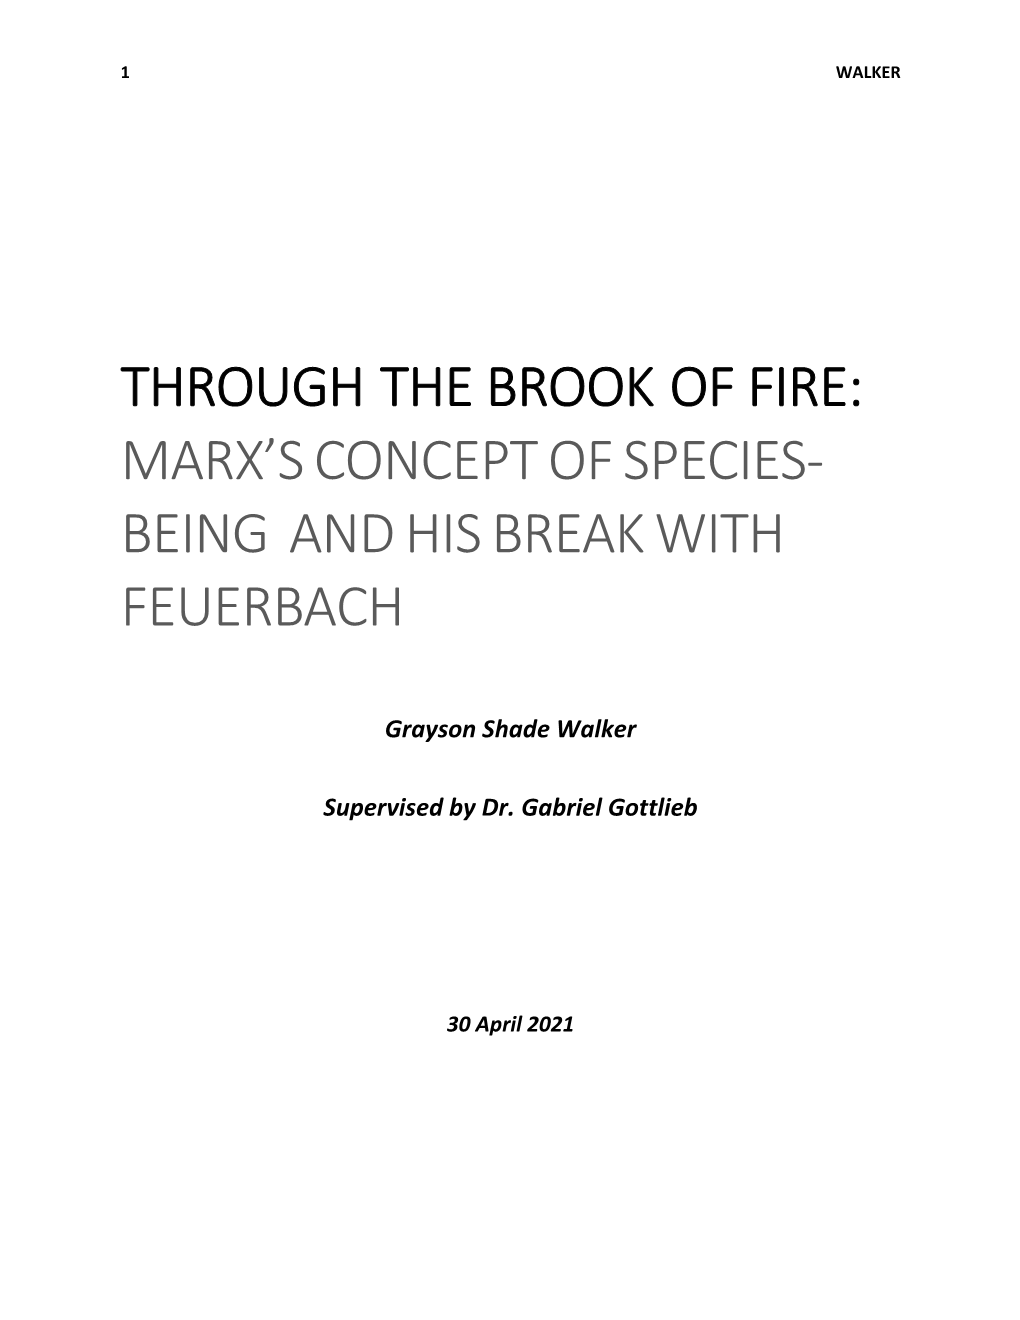 Through the Brook of Fire: Marx'sconceptofspecies- Being Andhisbreakwith Feuerbach